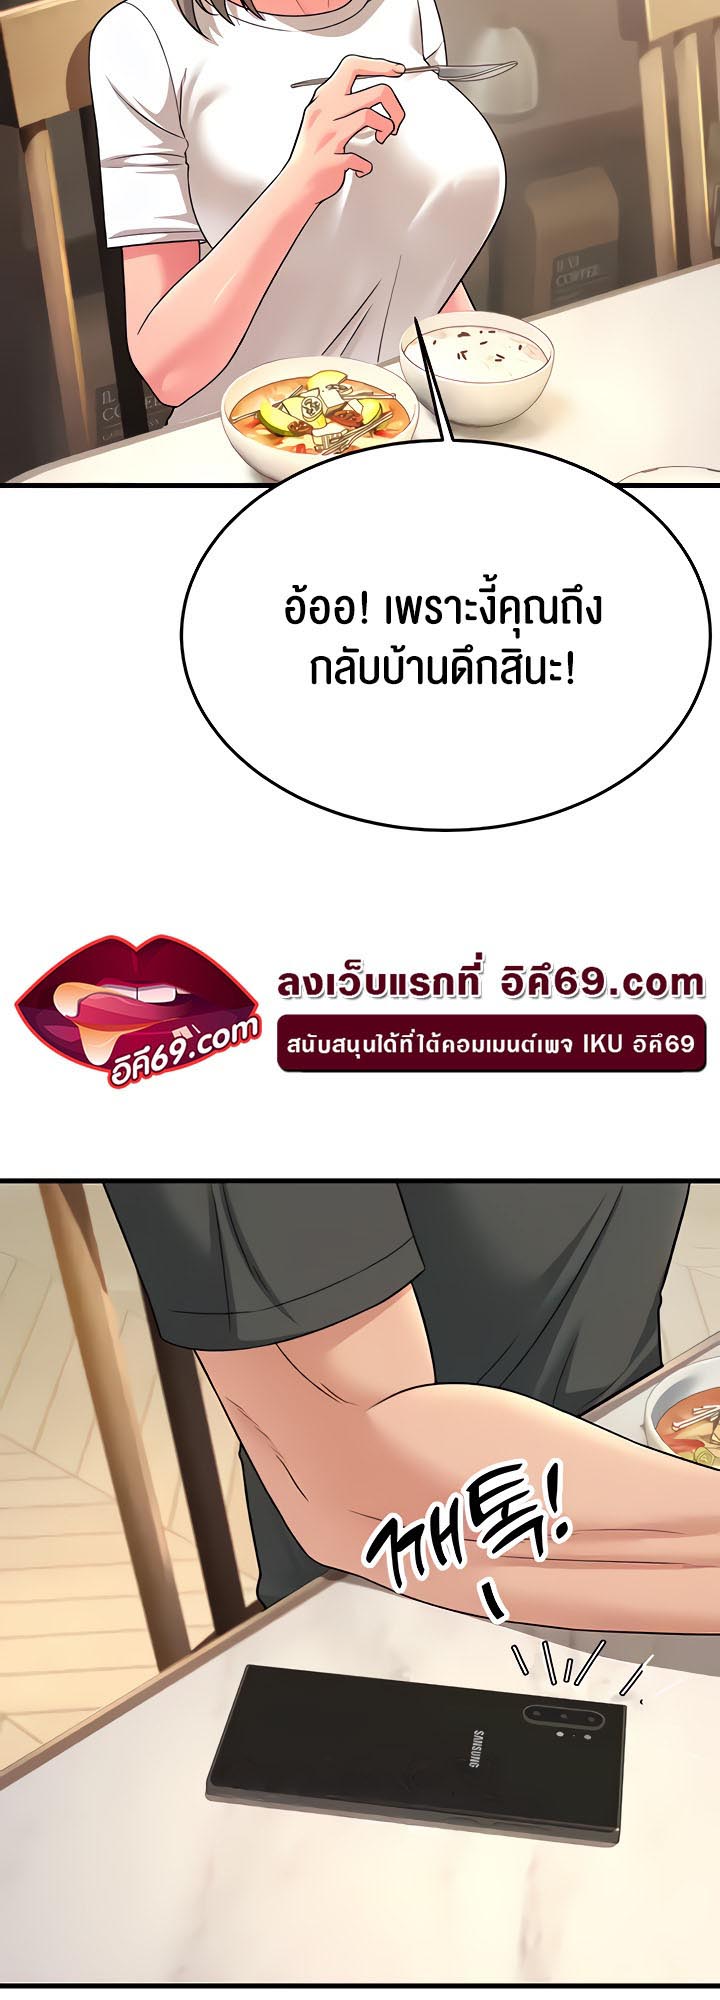 à¸­à¹ˆà¸²à¸™à¹‚à¸”à¸ˆà¸´à¸™ à¹€à¸£à¸·à¹ˆà¸­à¸‡ Mother in Law Bends To My Will 11 56